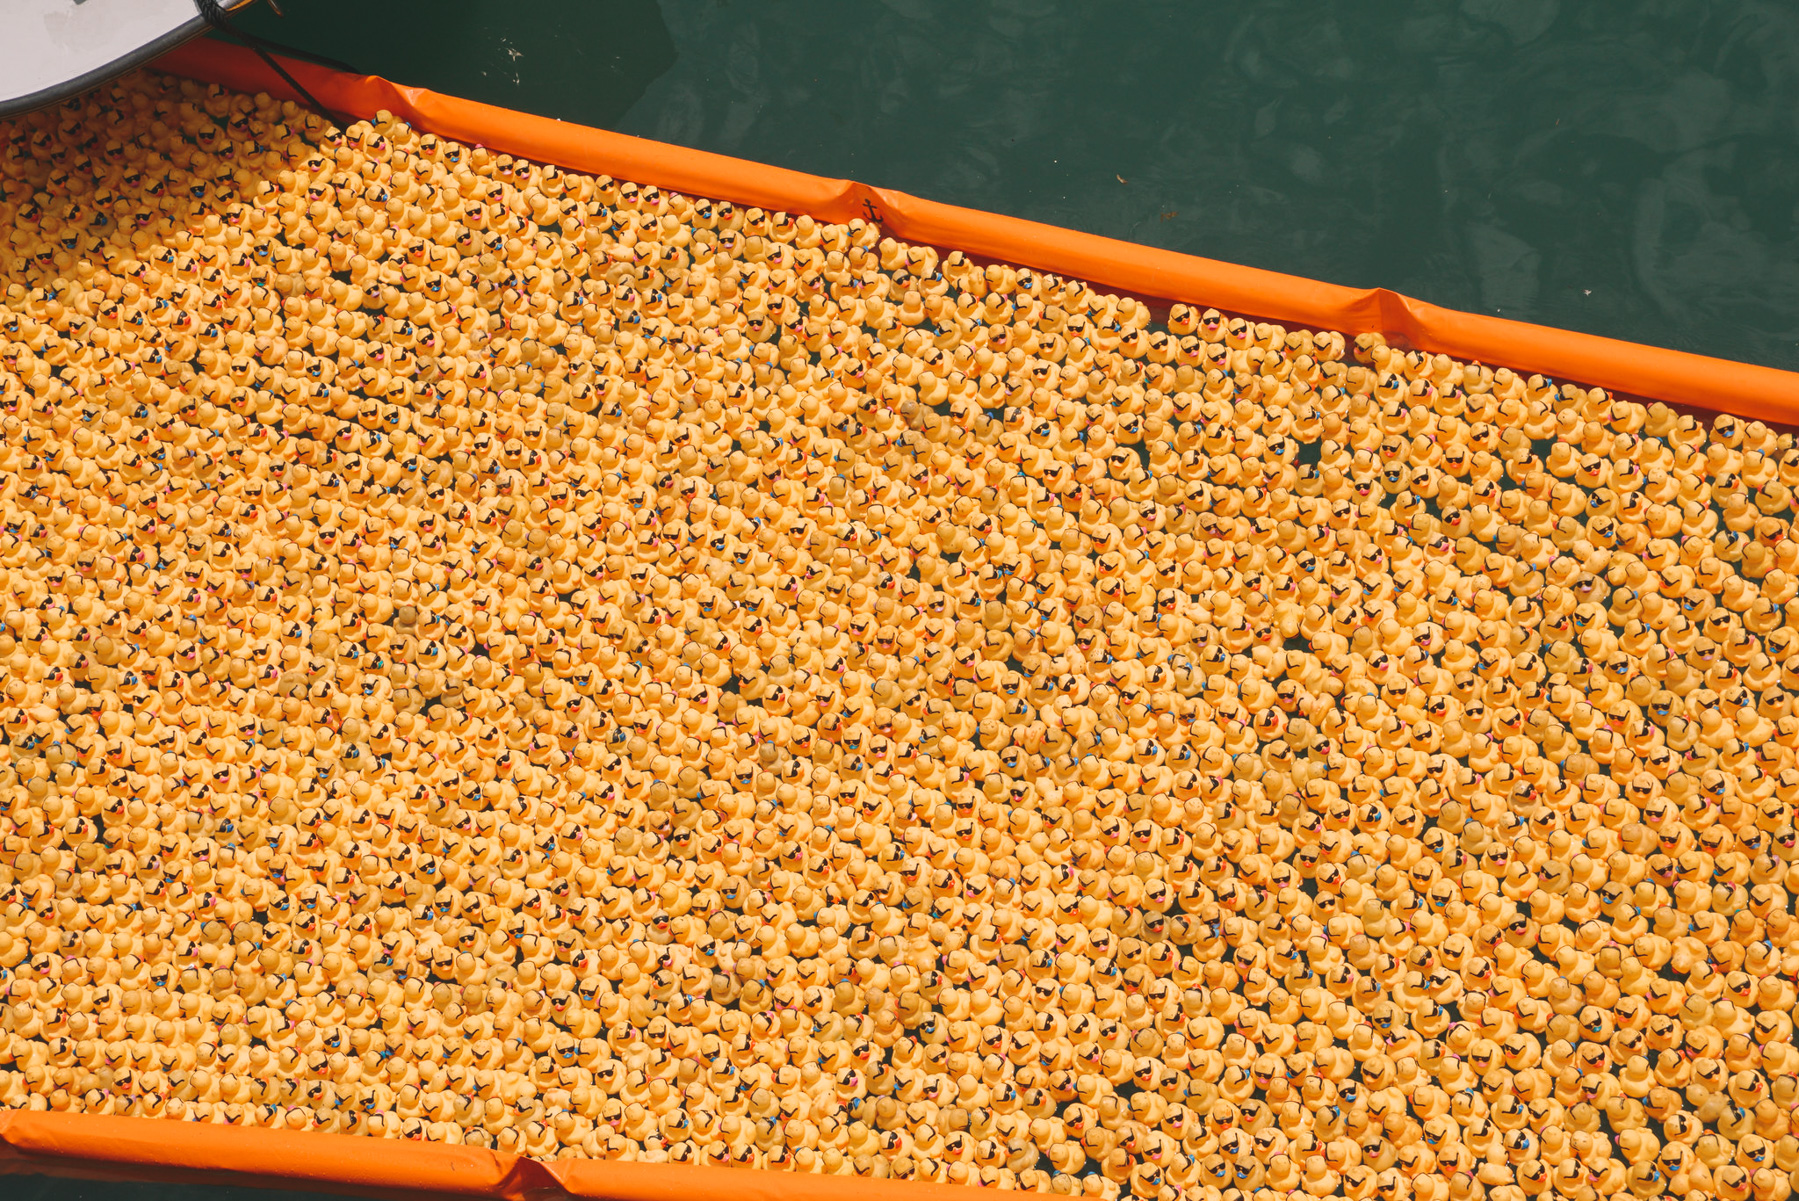 Thousands of rubber duckies are lined up for the big race